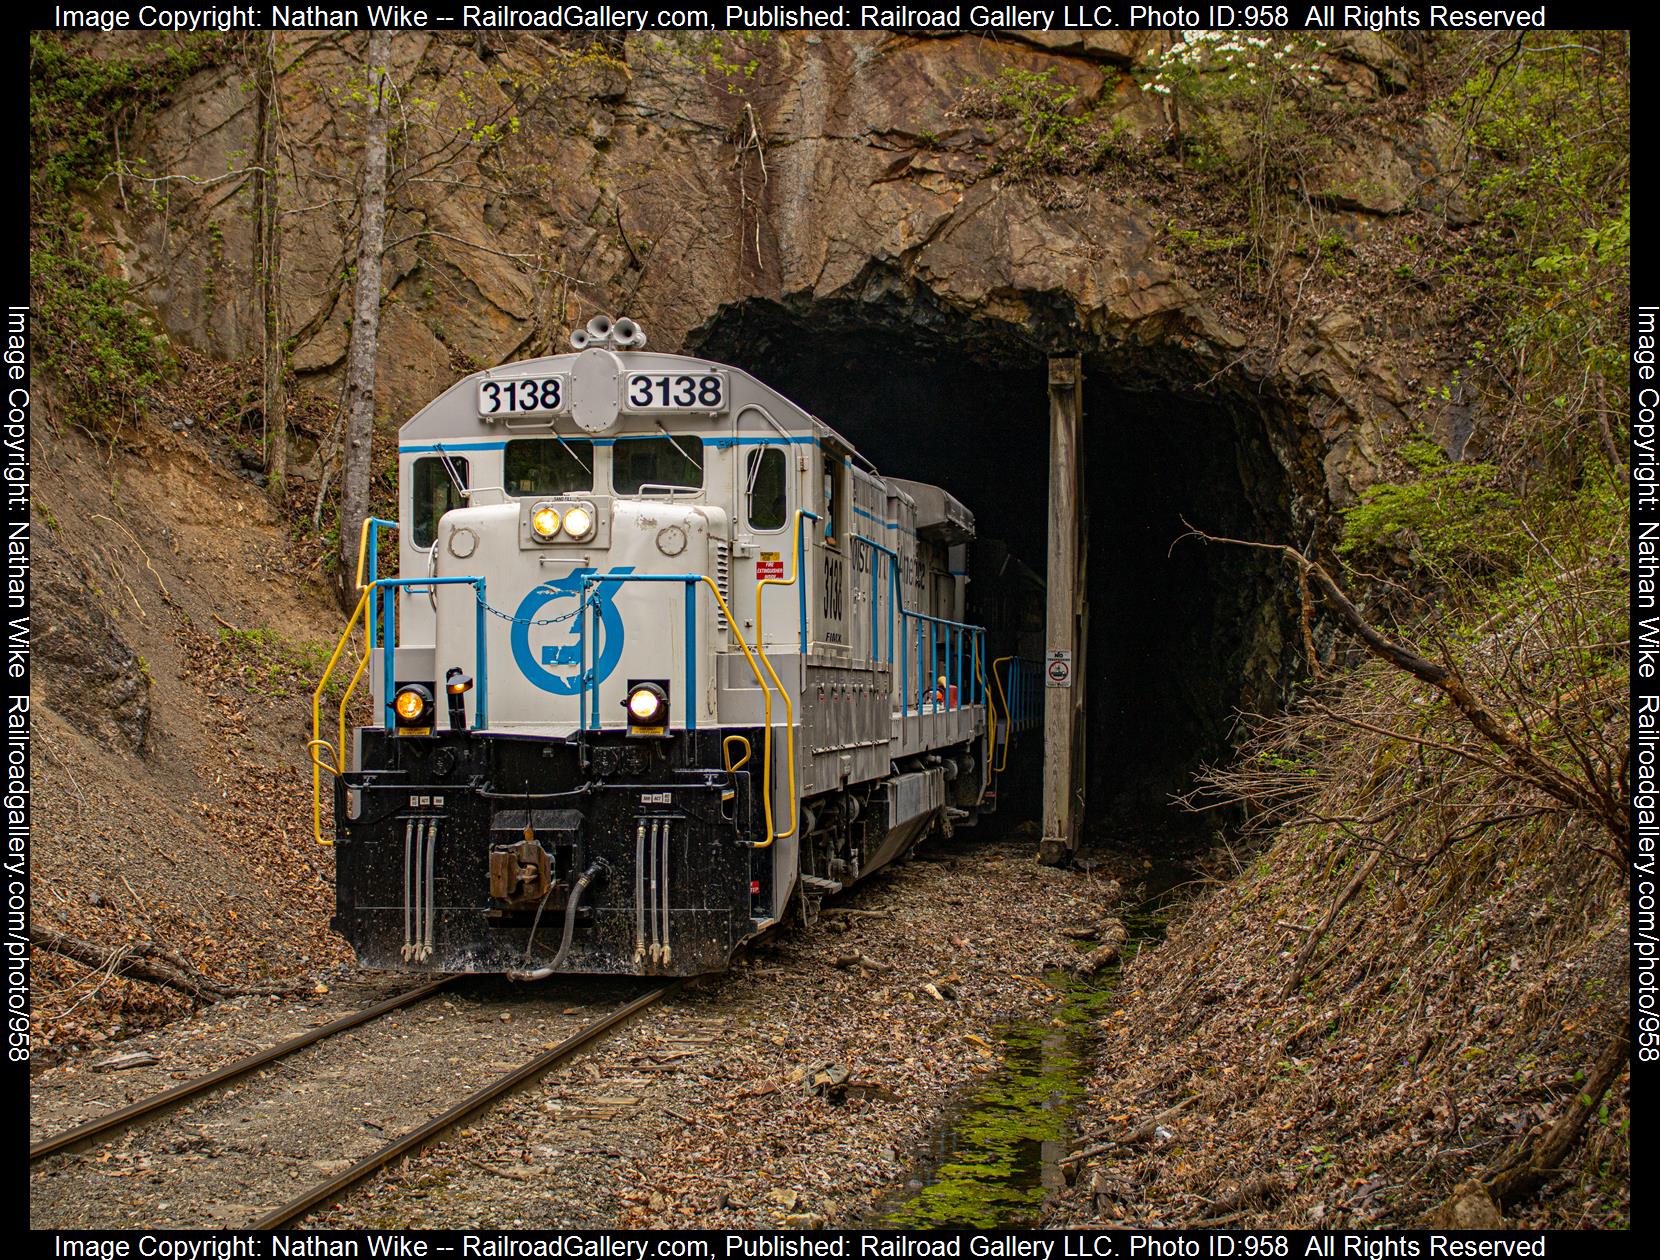 LNAX 3138 is a class B23-7 and  is pictured in Westel, Tennessee , United States.  This was taken along the Lhoist Railroad on the Lhoist North America. Photo Copyright: Nathan Wike uploaded to Railroad Gallery on 04/14/2023. This photograph of LNAX 3138 was taken on Friday, April 14, 2023. All Rights Reserved. 